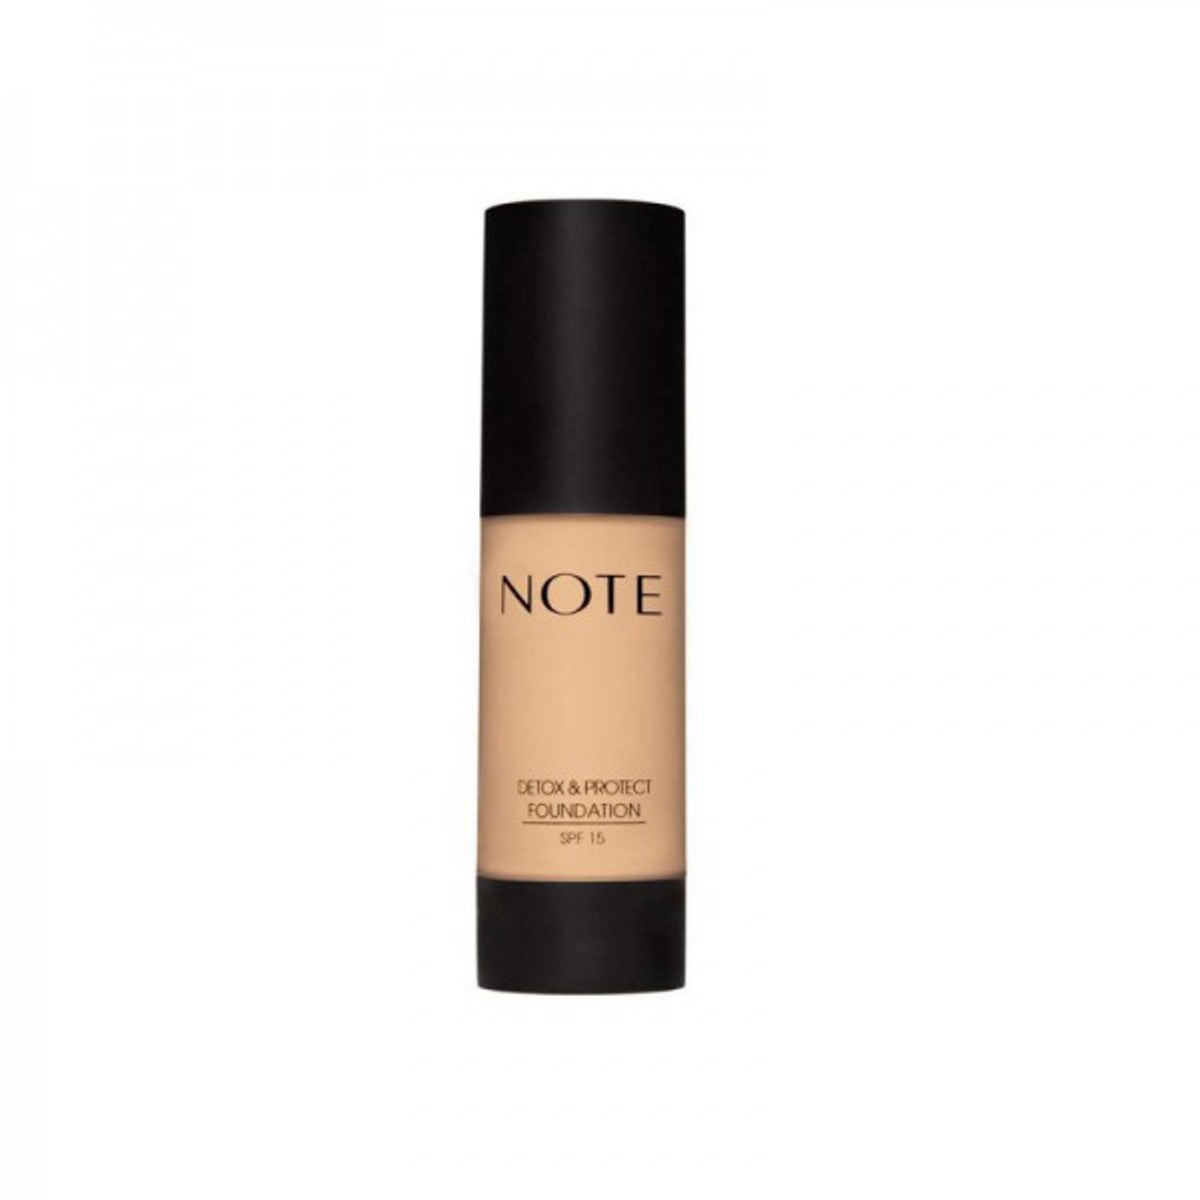 Note Detox And Protect Foundation (35ml)